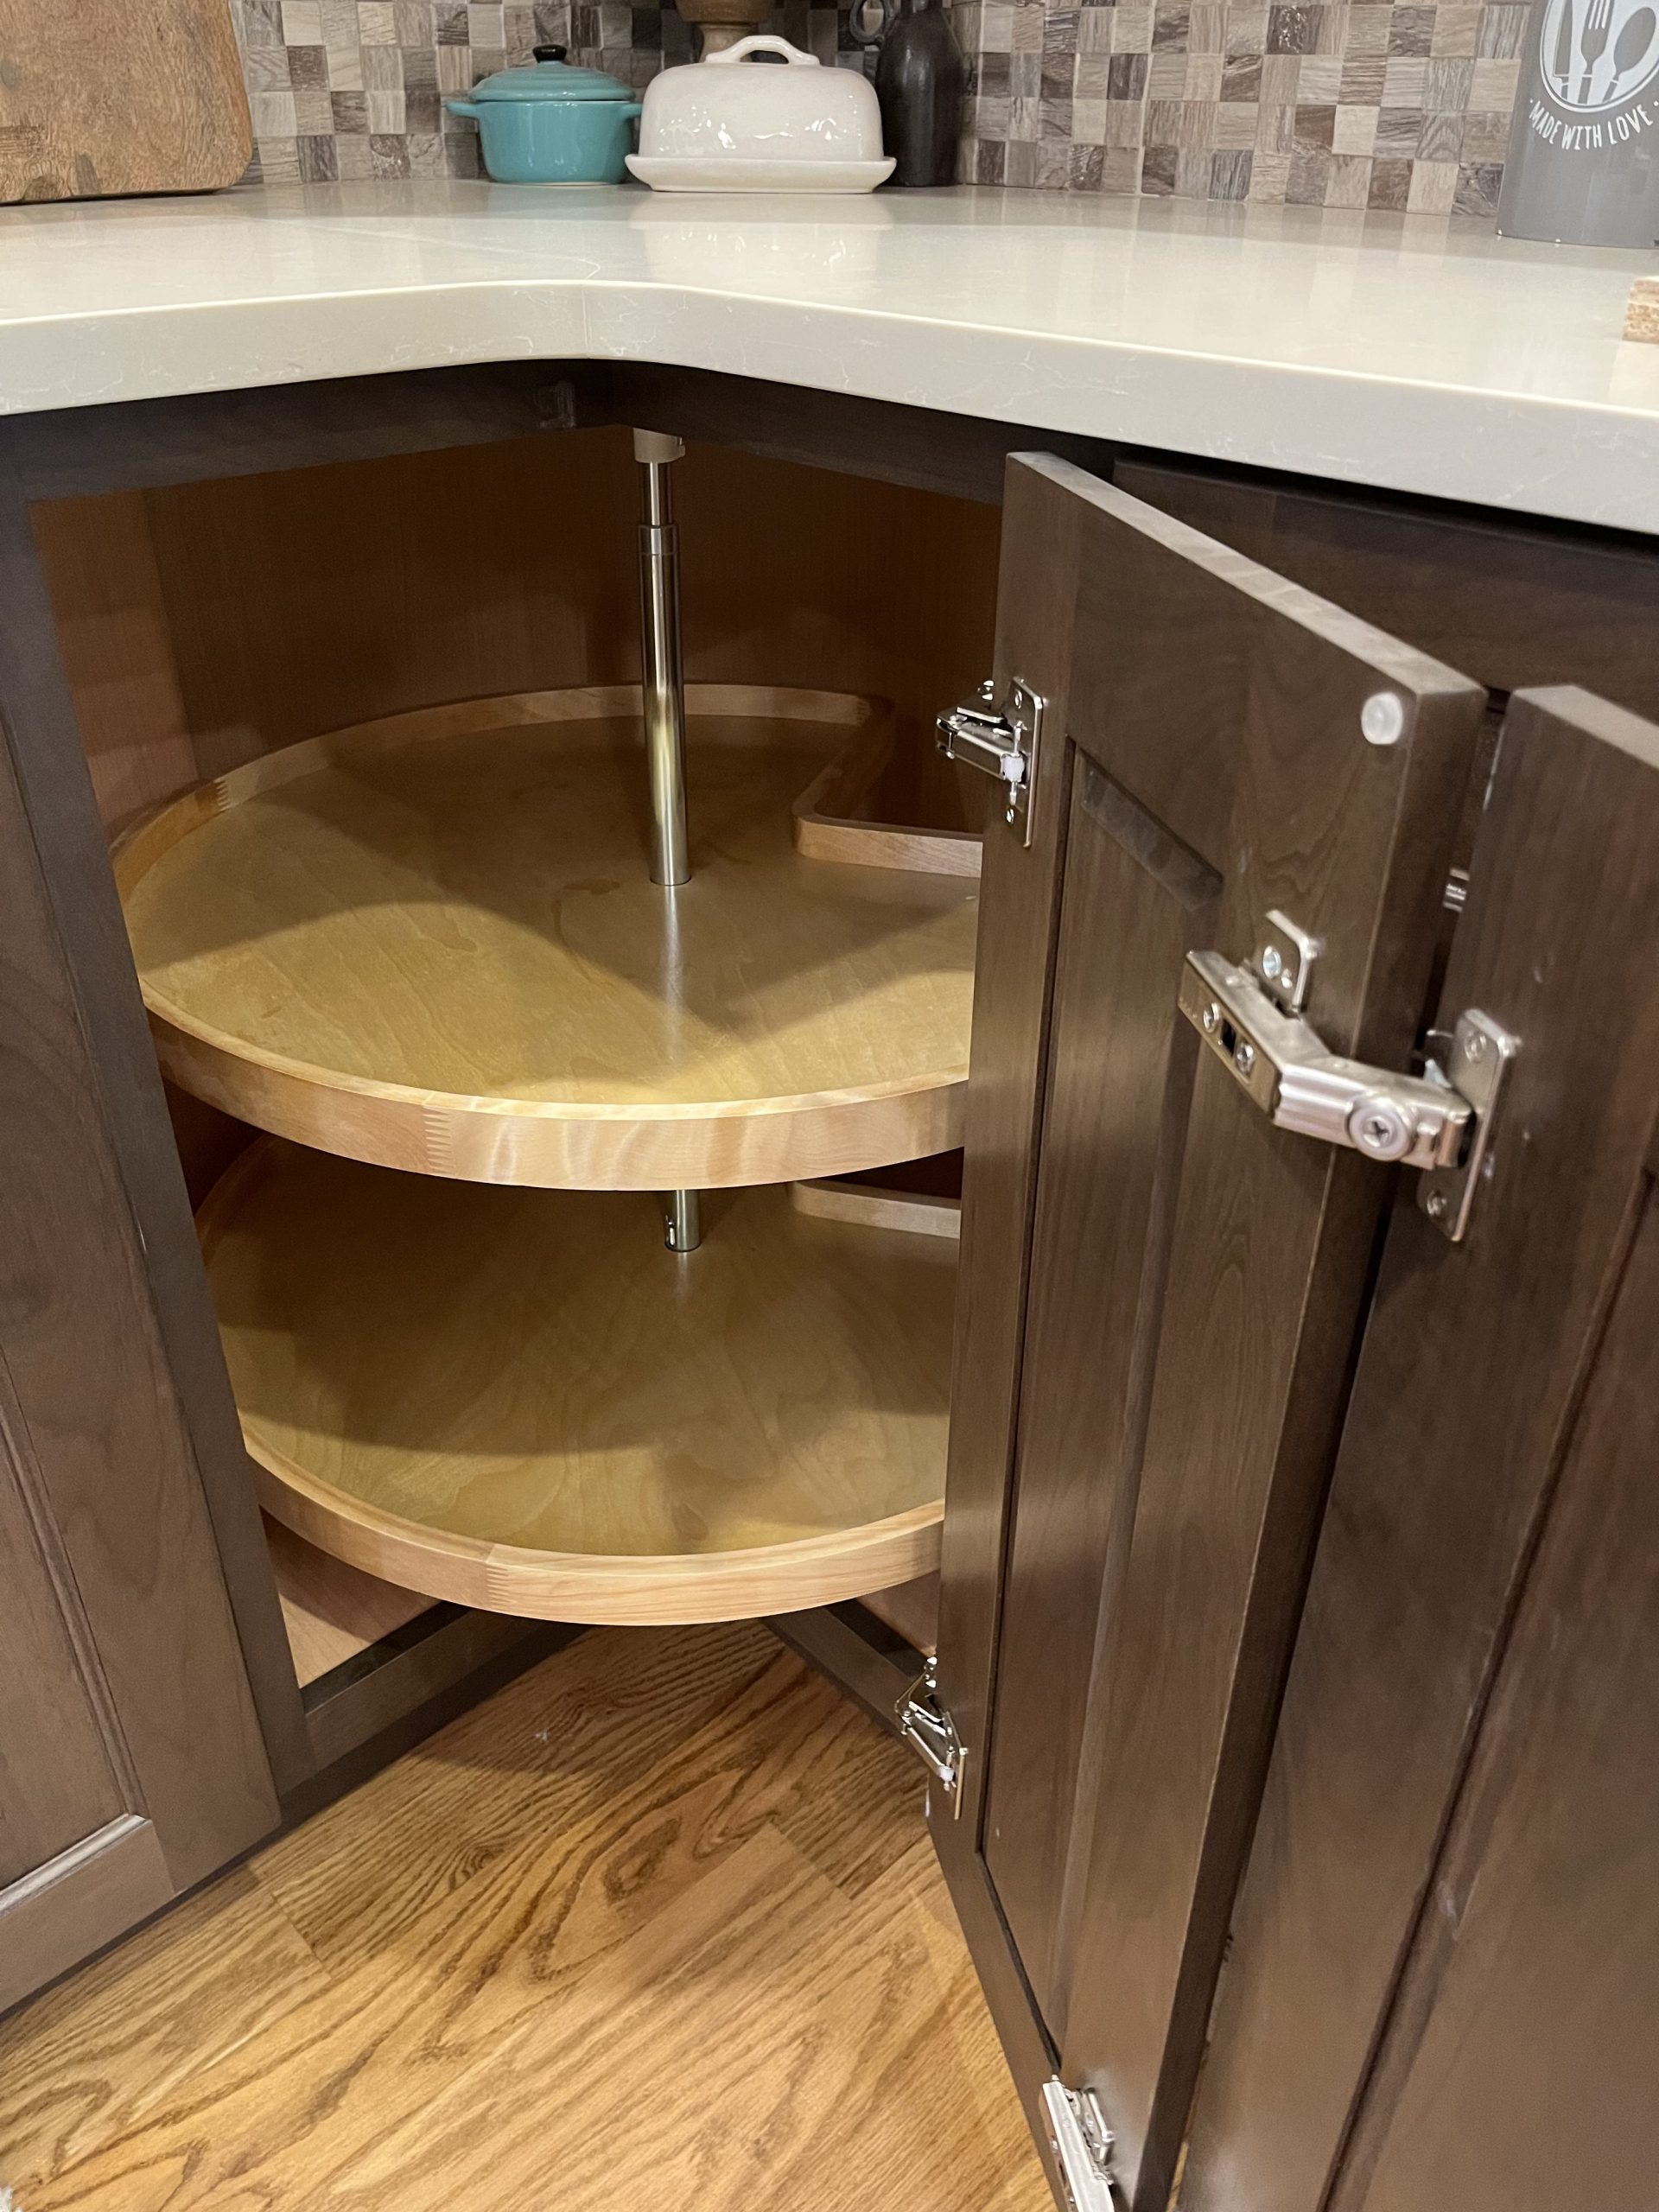 A lazy susan keeps everything accessible in a corner cabinet.